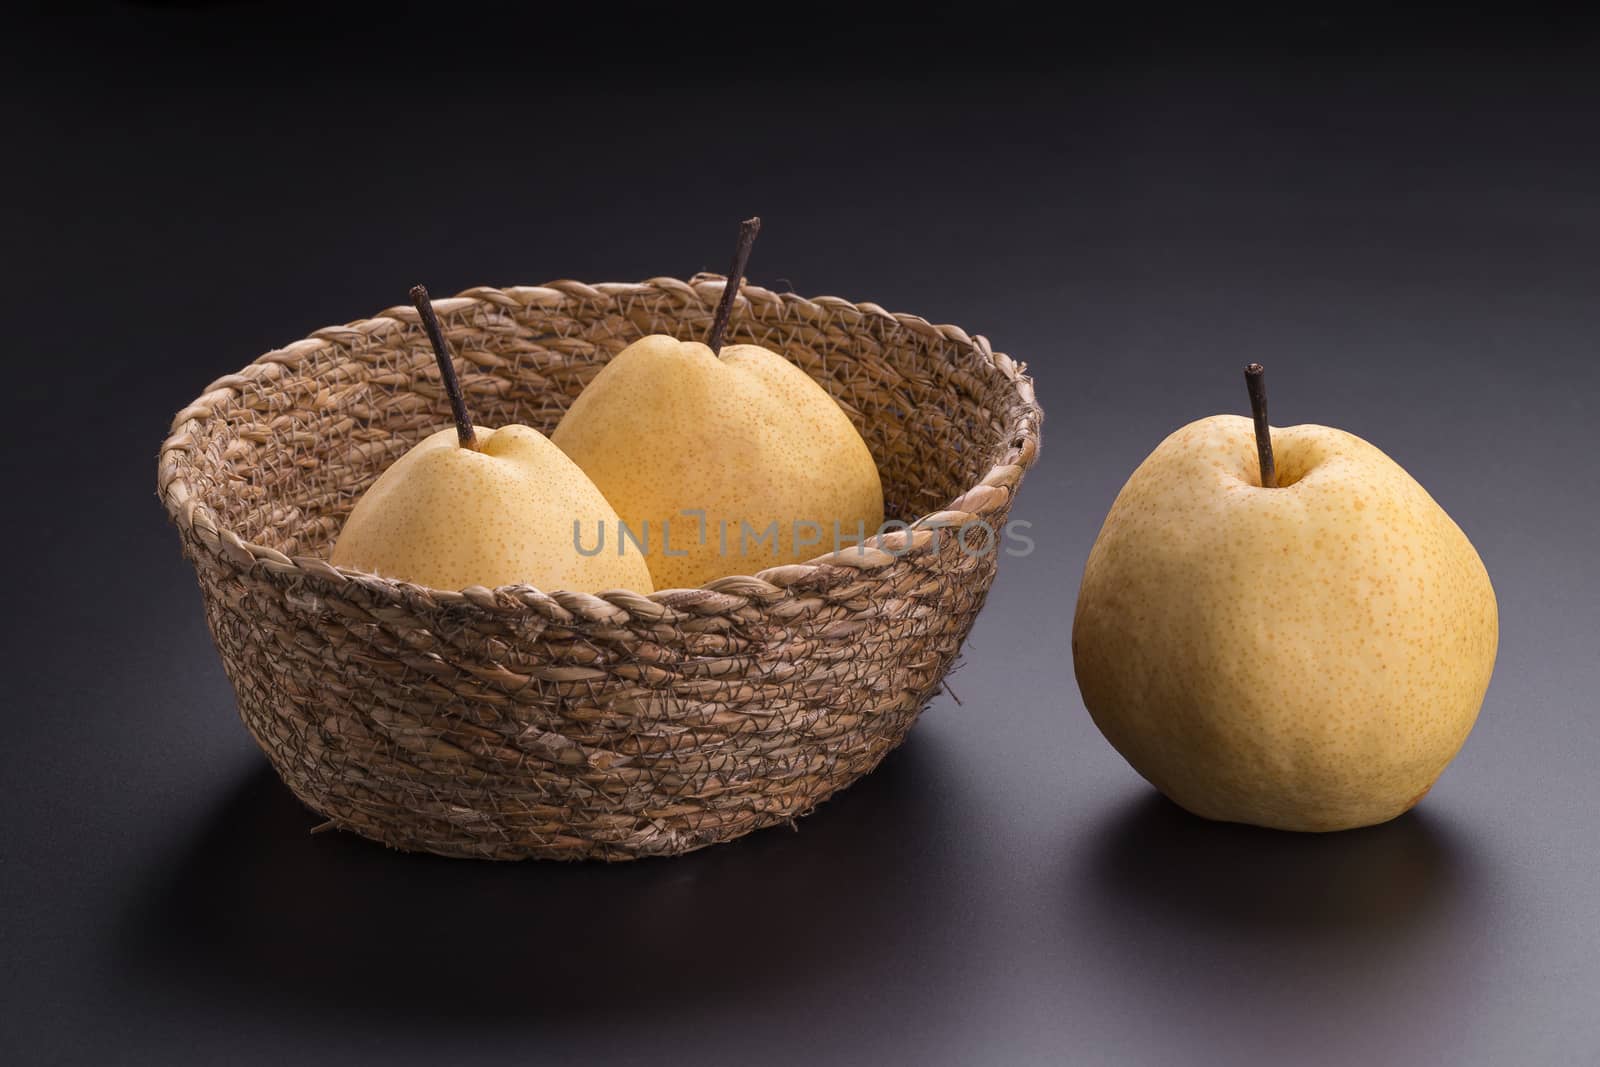 Chinese pear fruits on black background by kaiskynet